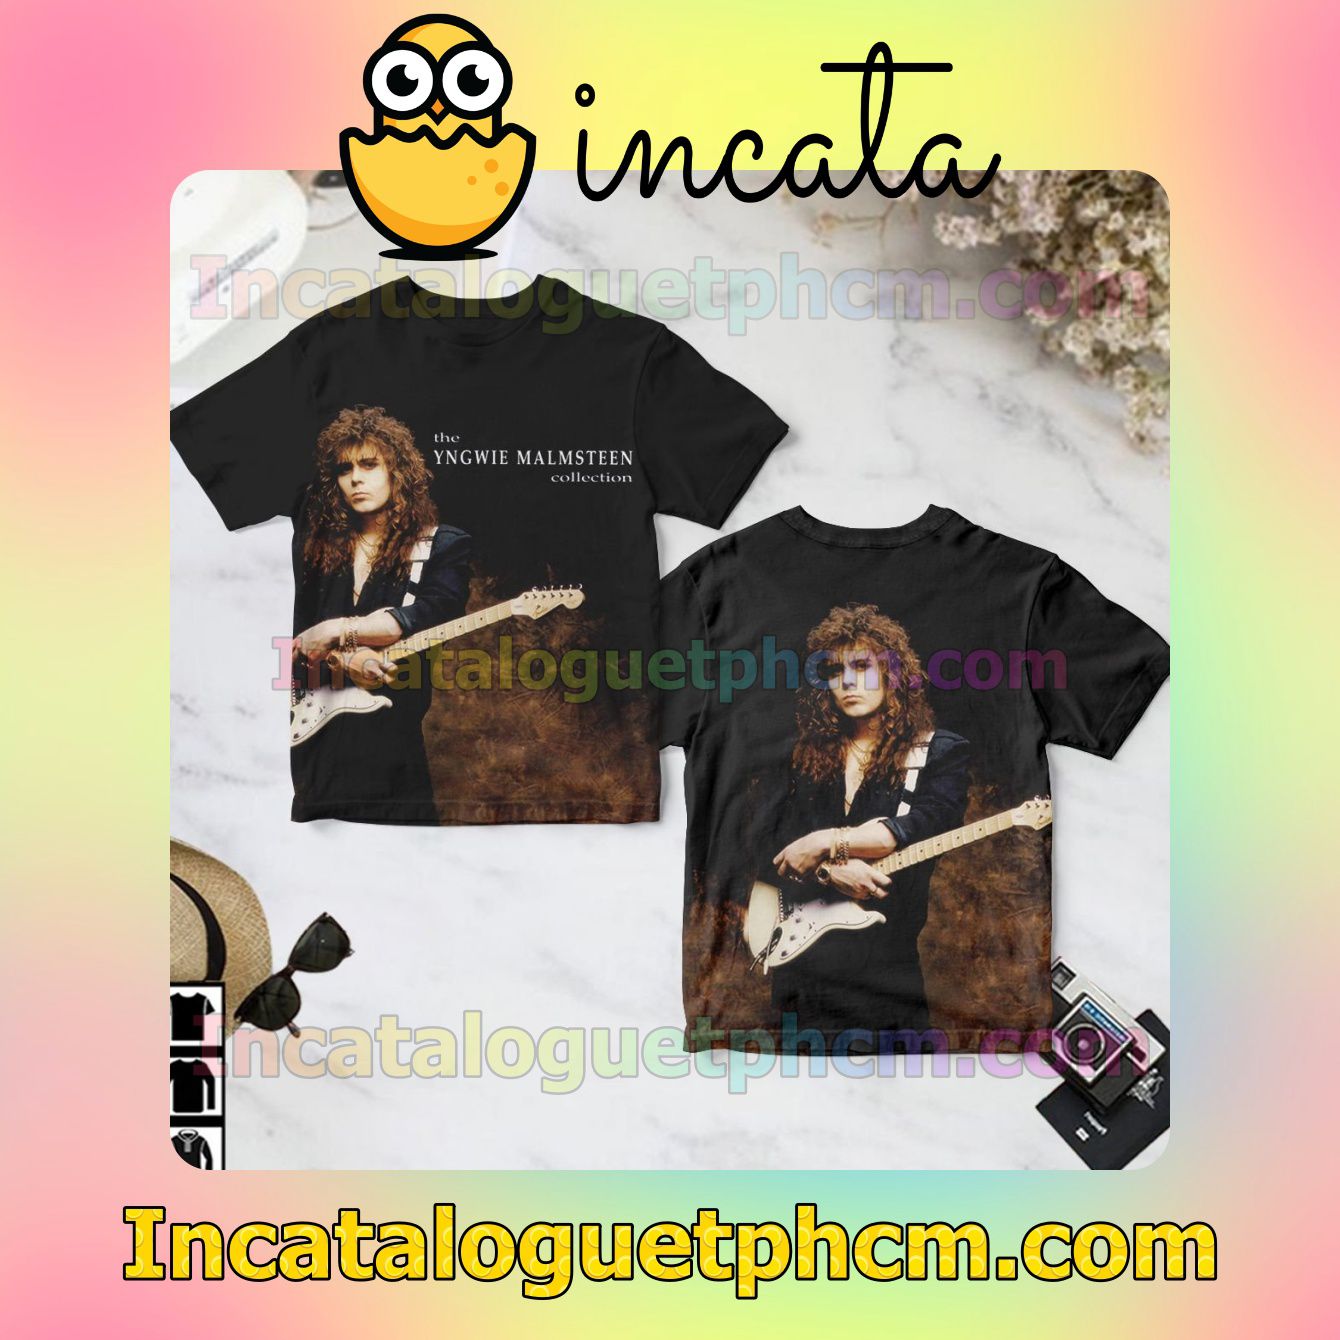 The Yngwie Malmsteen Collection Album Cover Gift Shirt